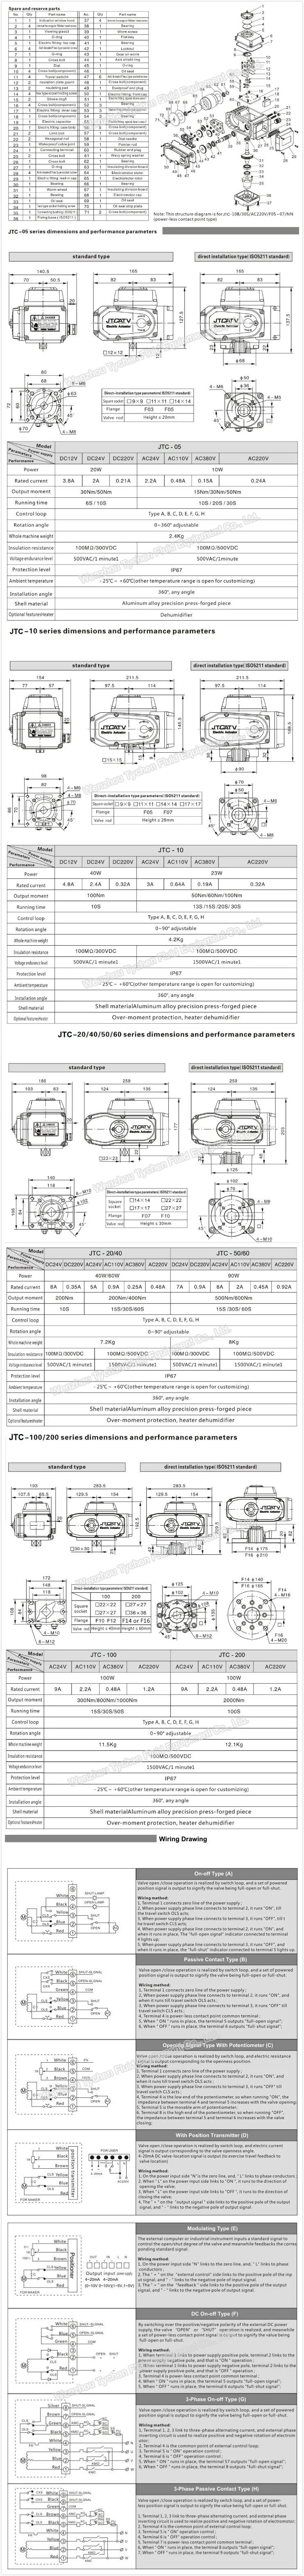 CF8/CF8m 3 Piece Electric Ball Valve Thread/Clamped/Welding End